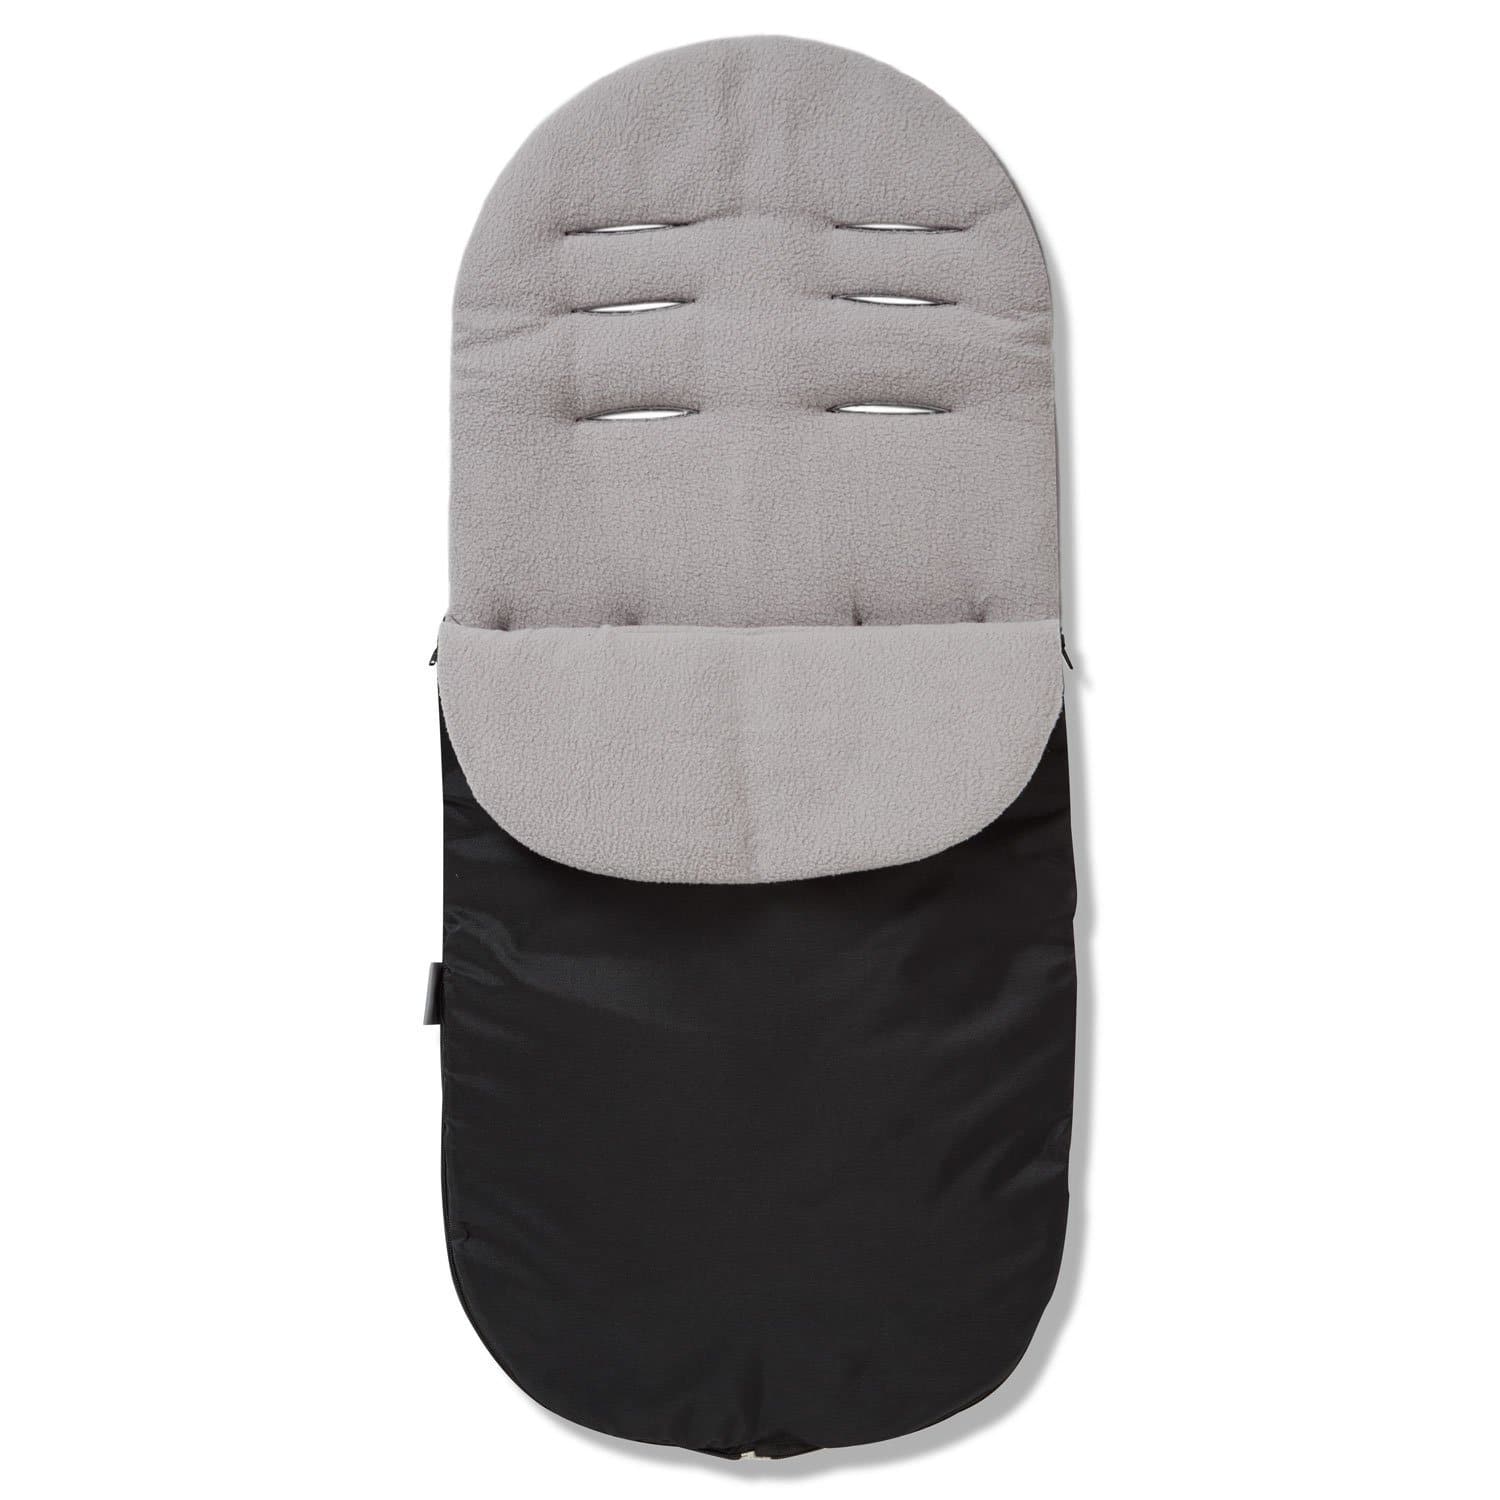 Footmuff / Cosy Toes Compatible with Valco - Grey / Fits All Models | For Your Little One